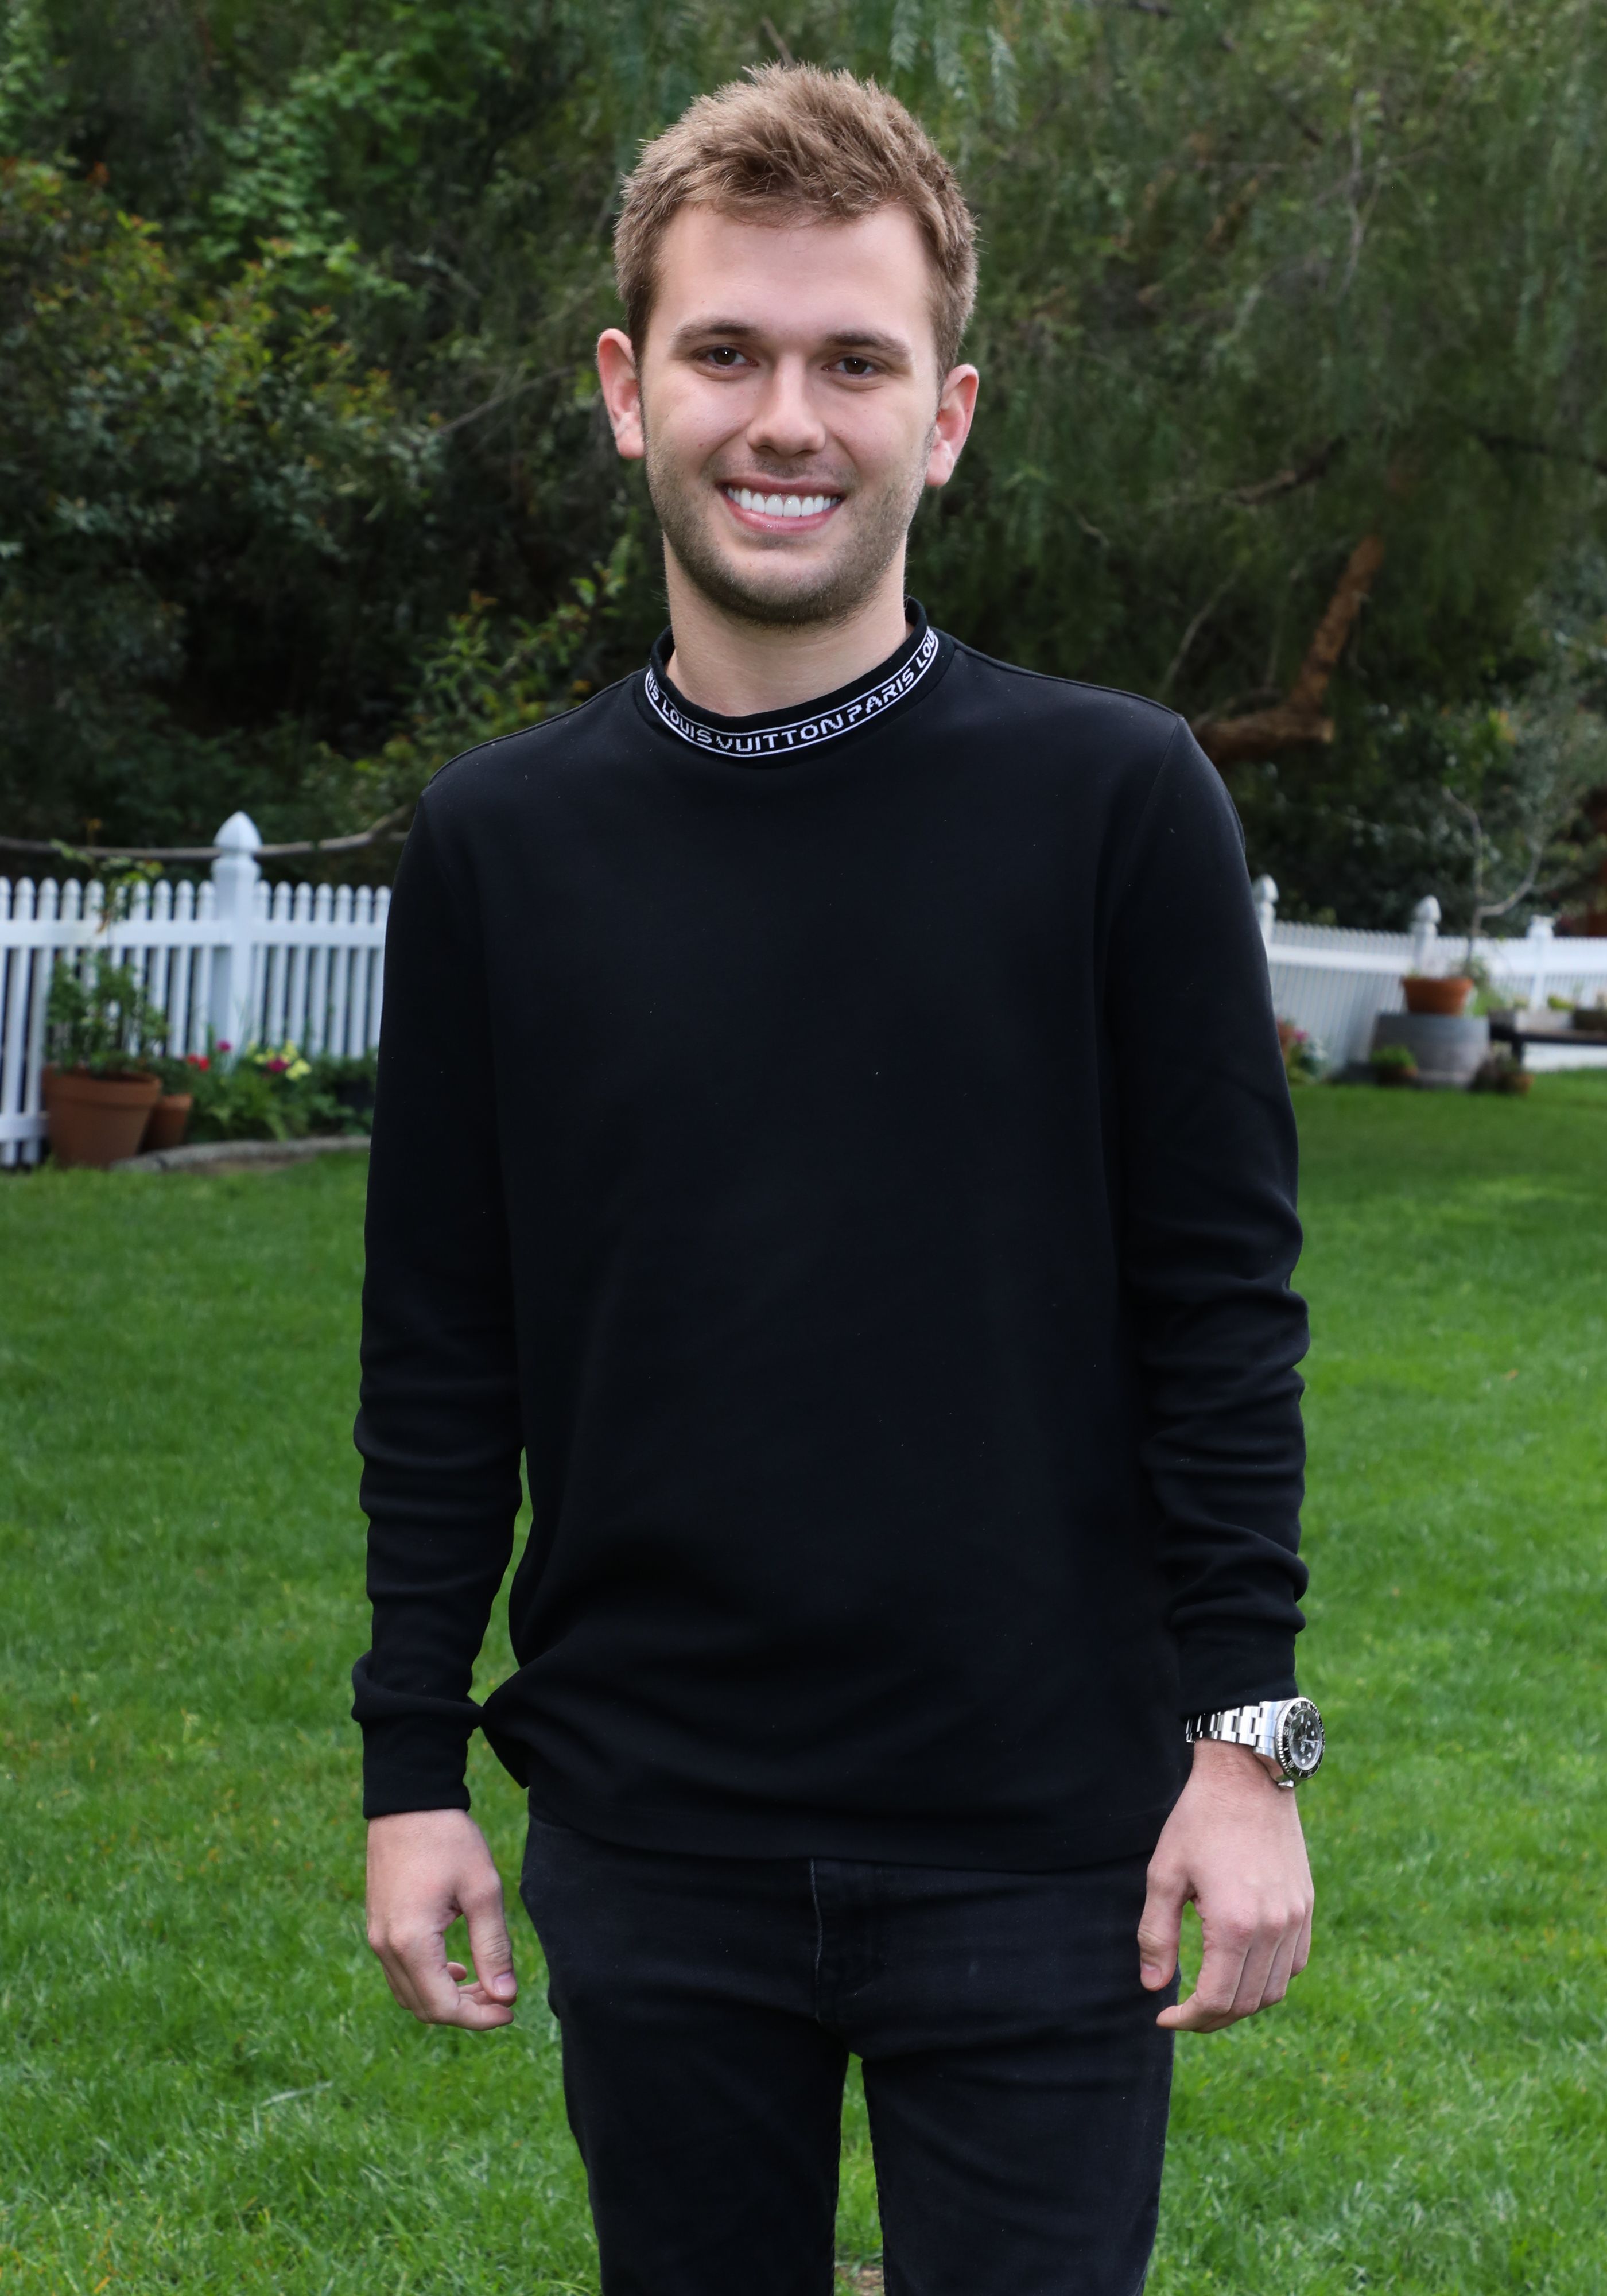 Chase Chrisley visits Hallmark's "Home & Family" at Universal Studios Hollywood on March 27, 2019. | Photo: Getty Images